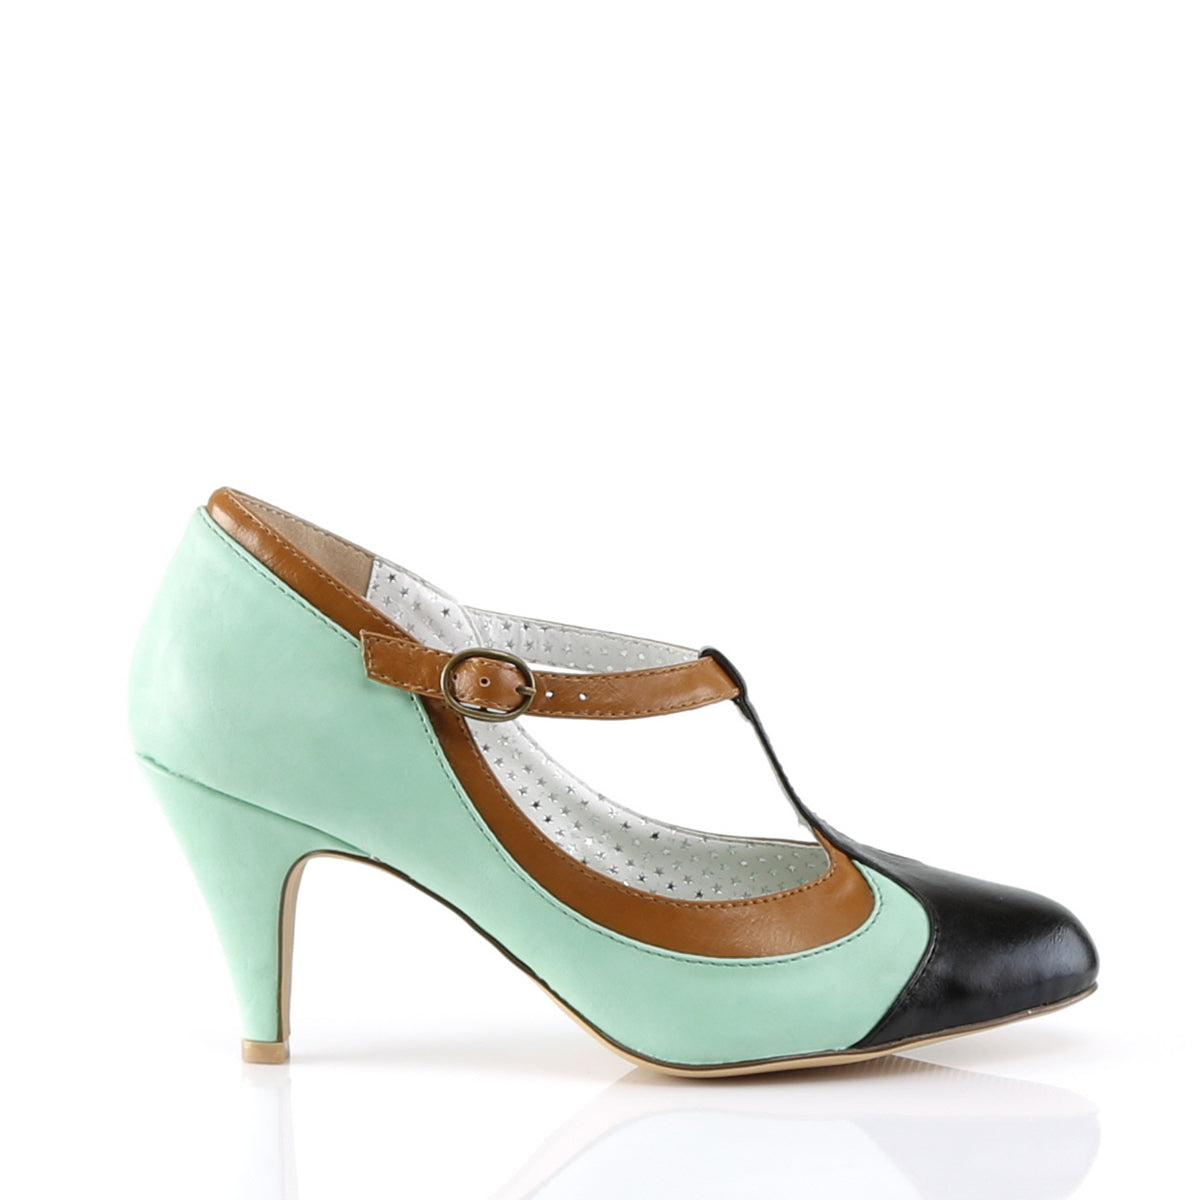 PEACH-03 Pin Up Couture Mint Multi Faux Leather Single Soles [Retro Glamour Shoes]